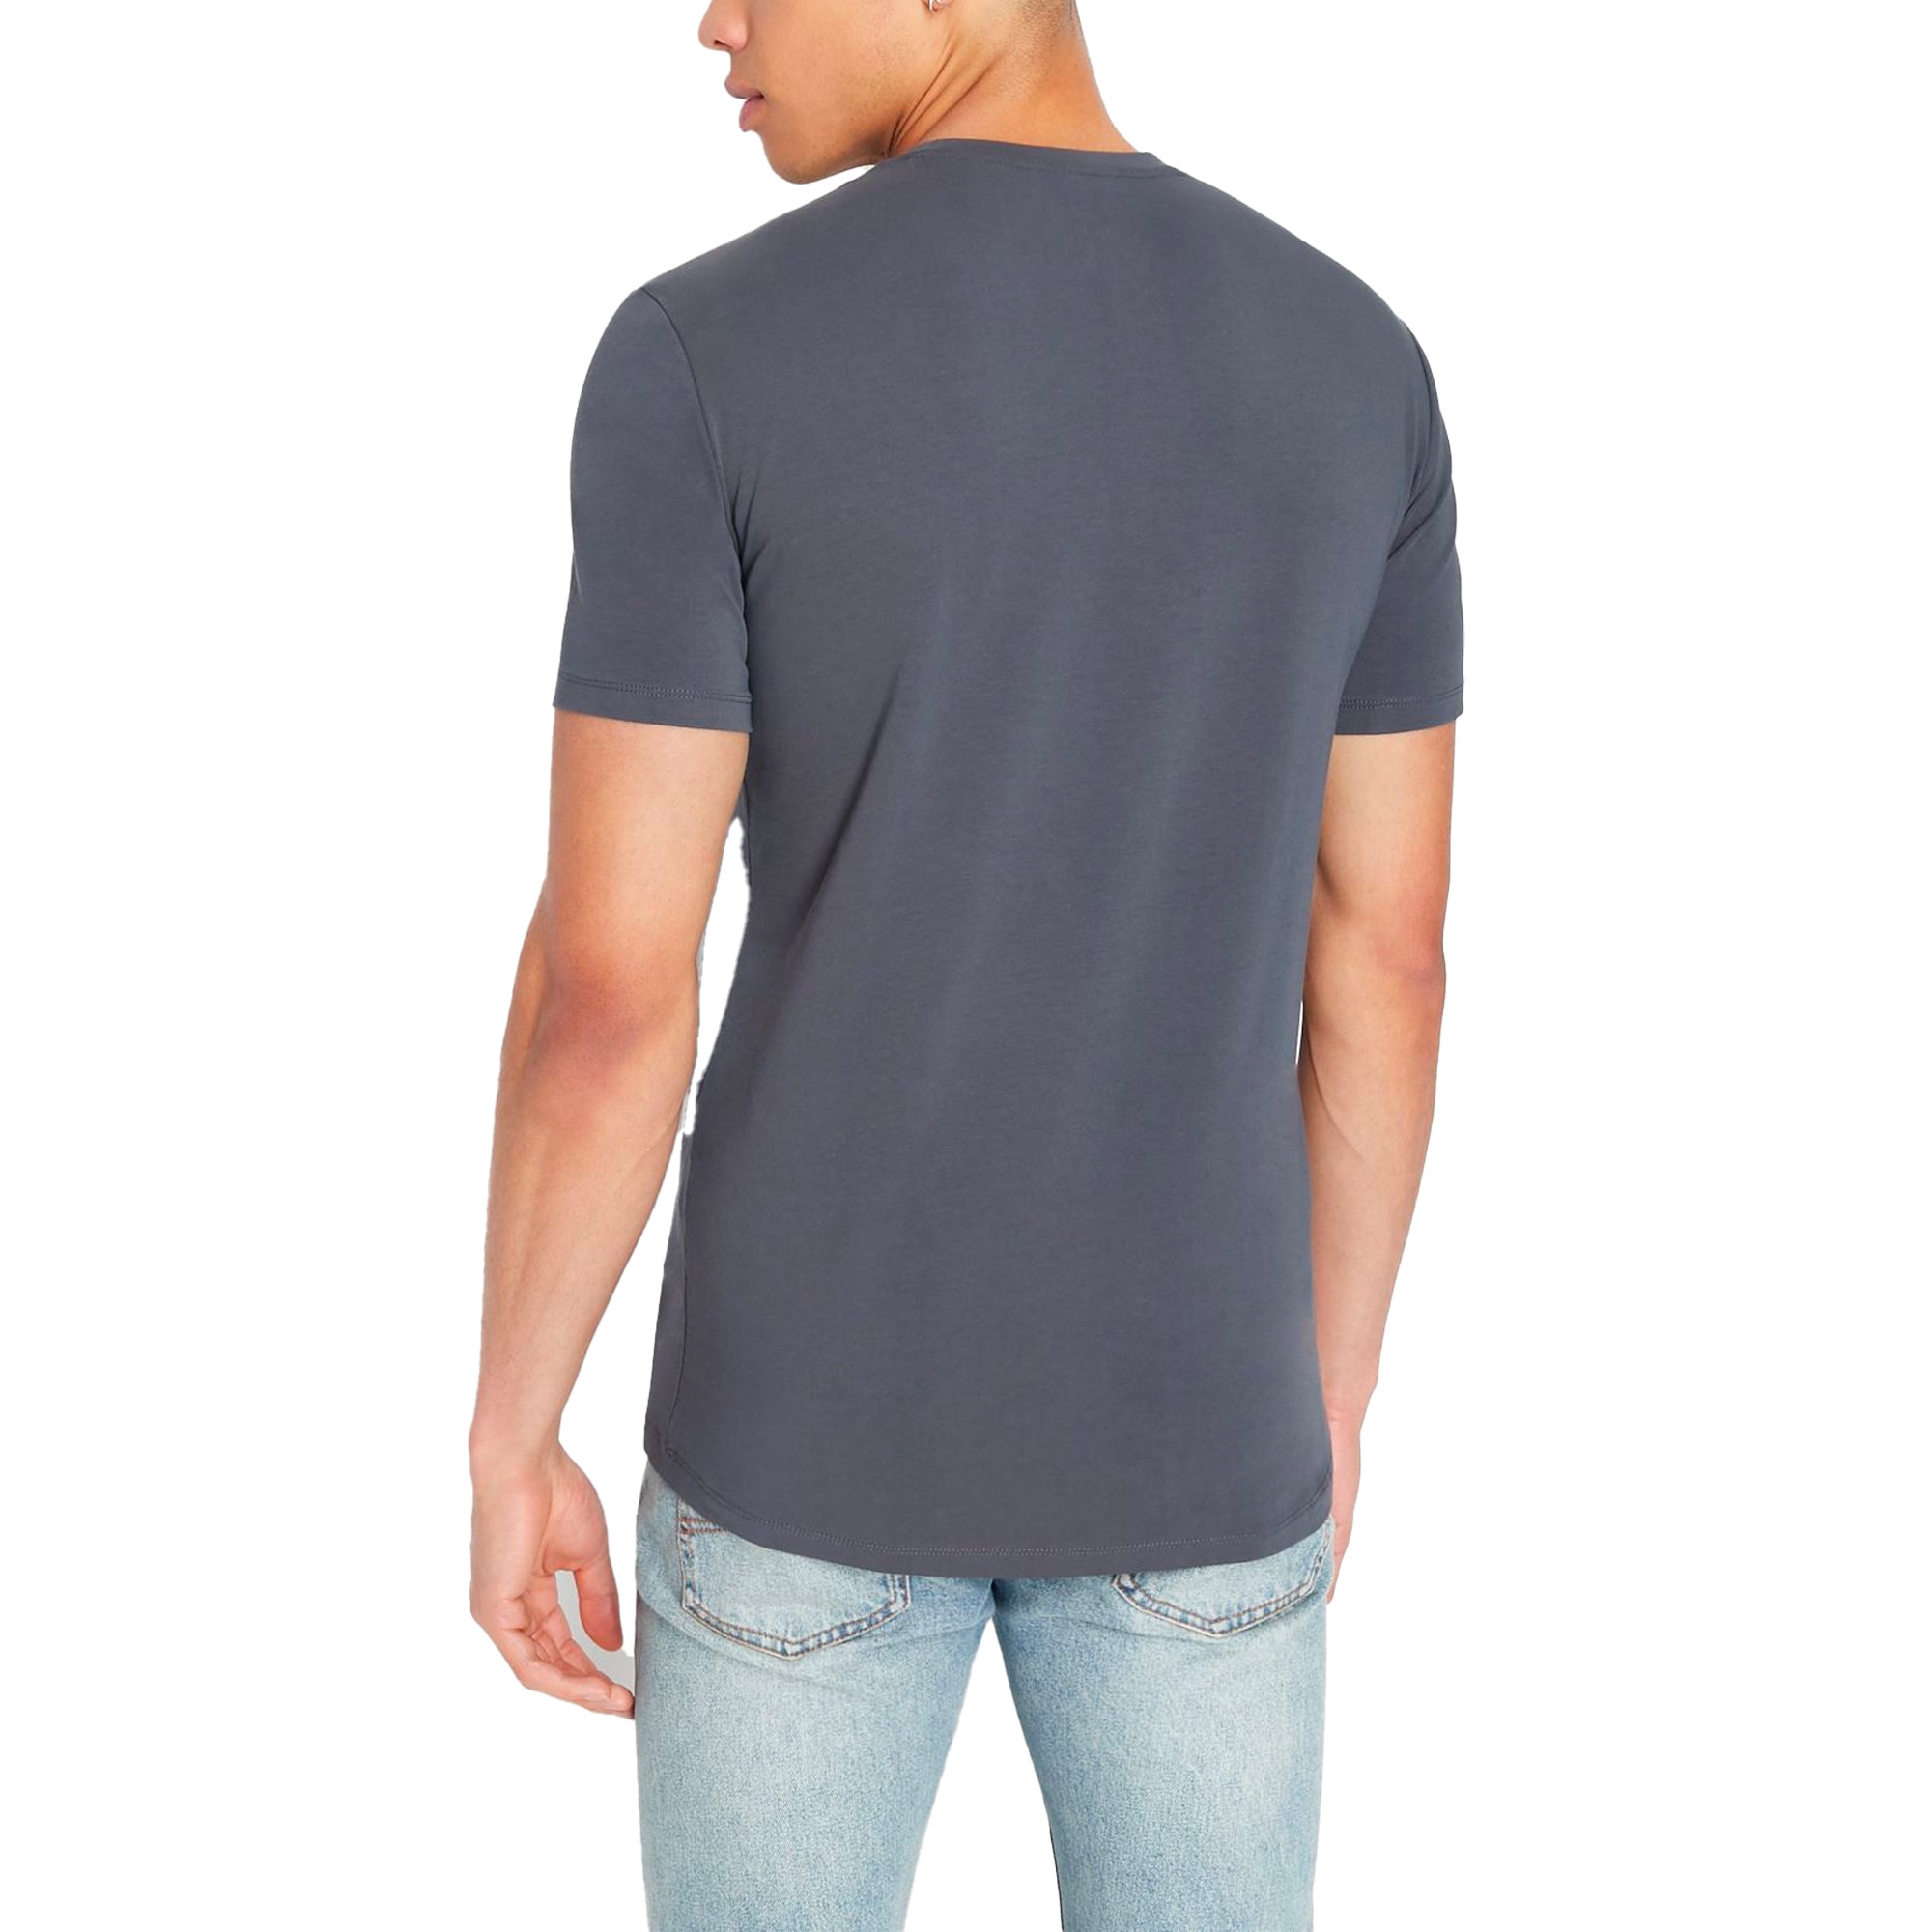 Armani Exchange Small Chest Logo Stretch T-Shirt - Charcoal Blue